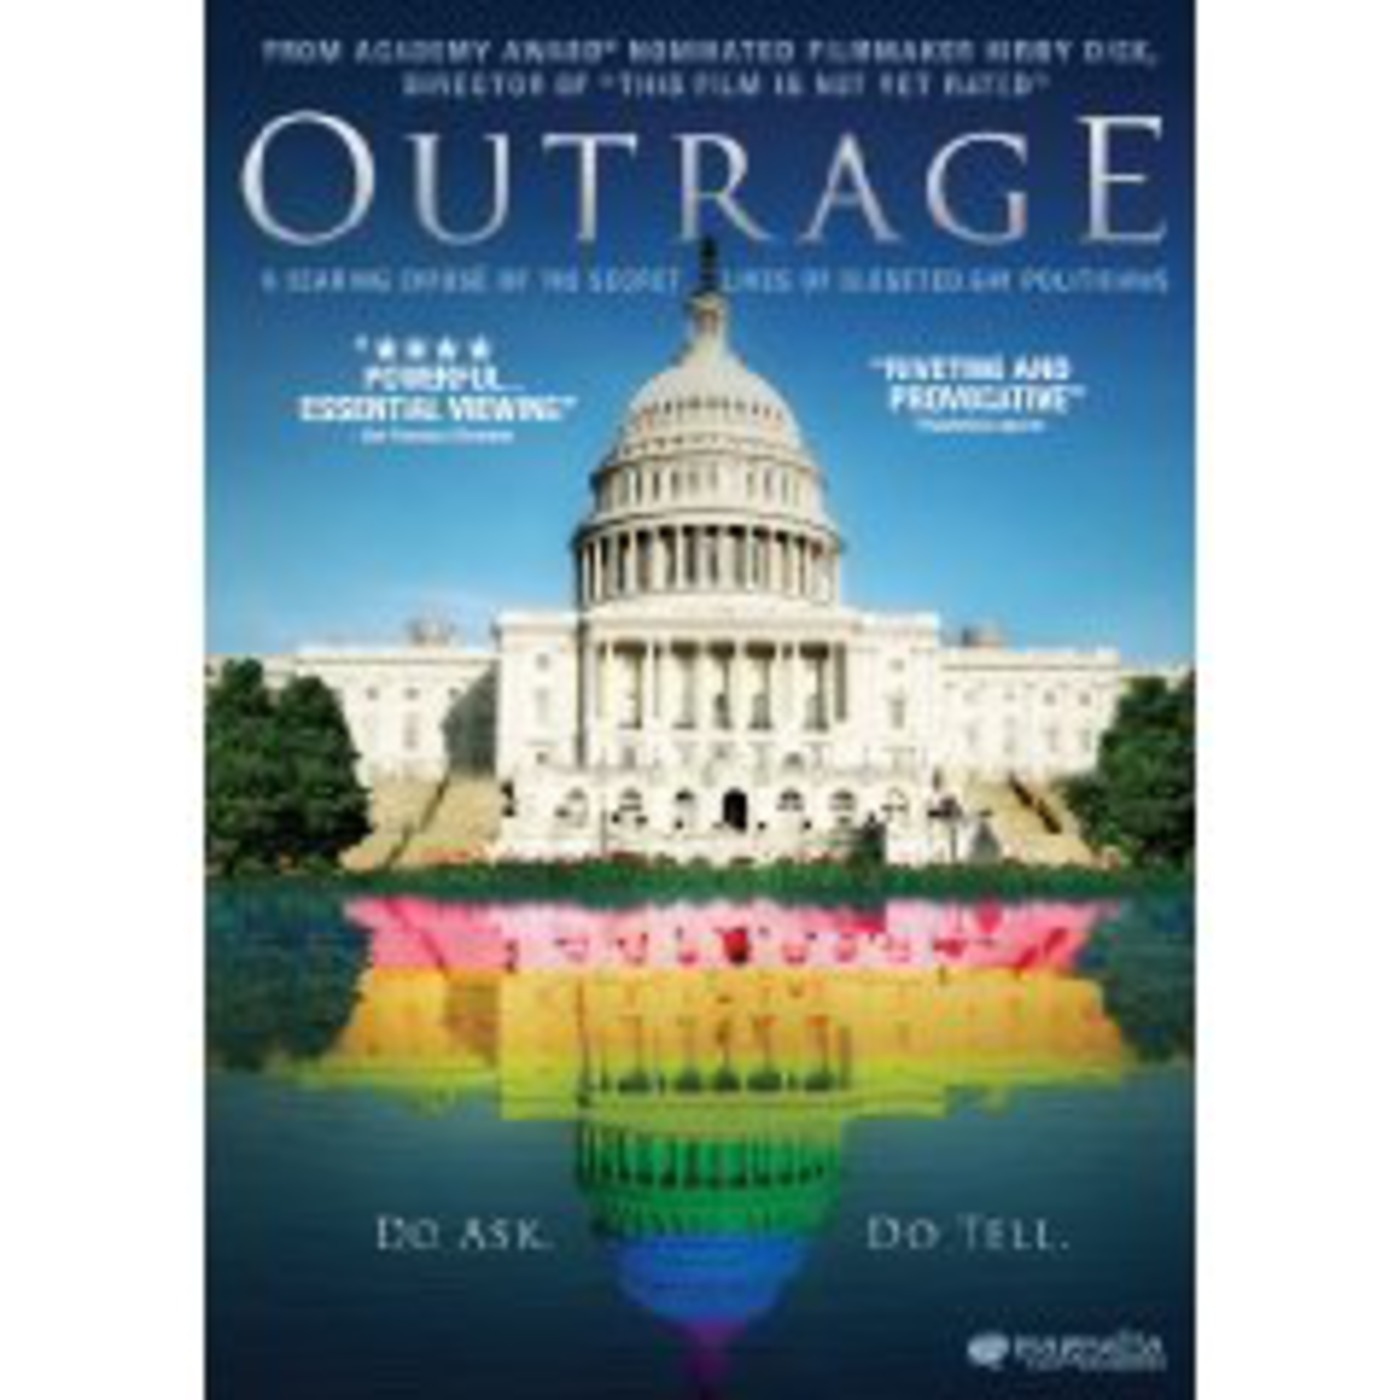 (65) 'Outrage' Director Kirby Dick